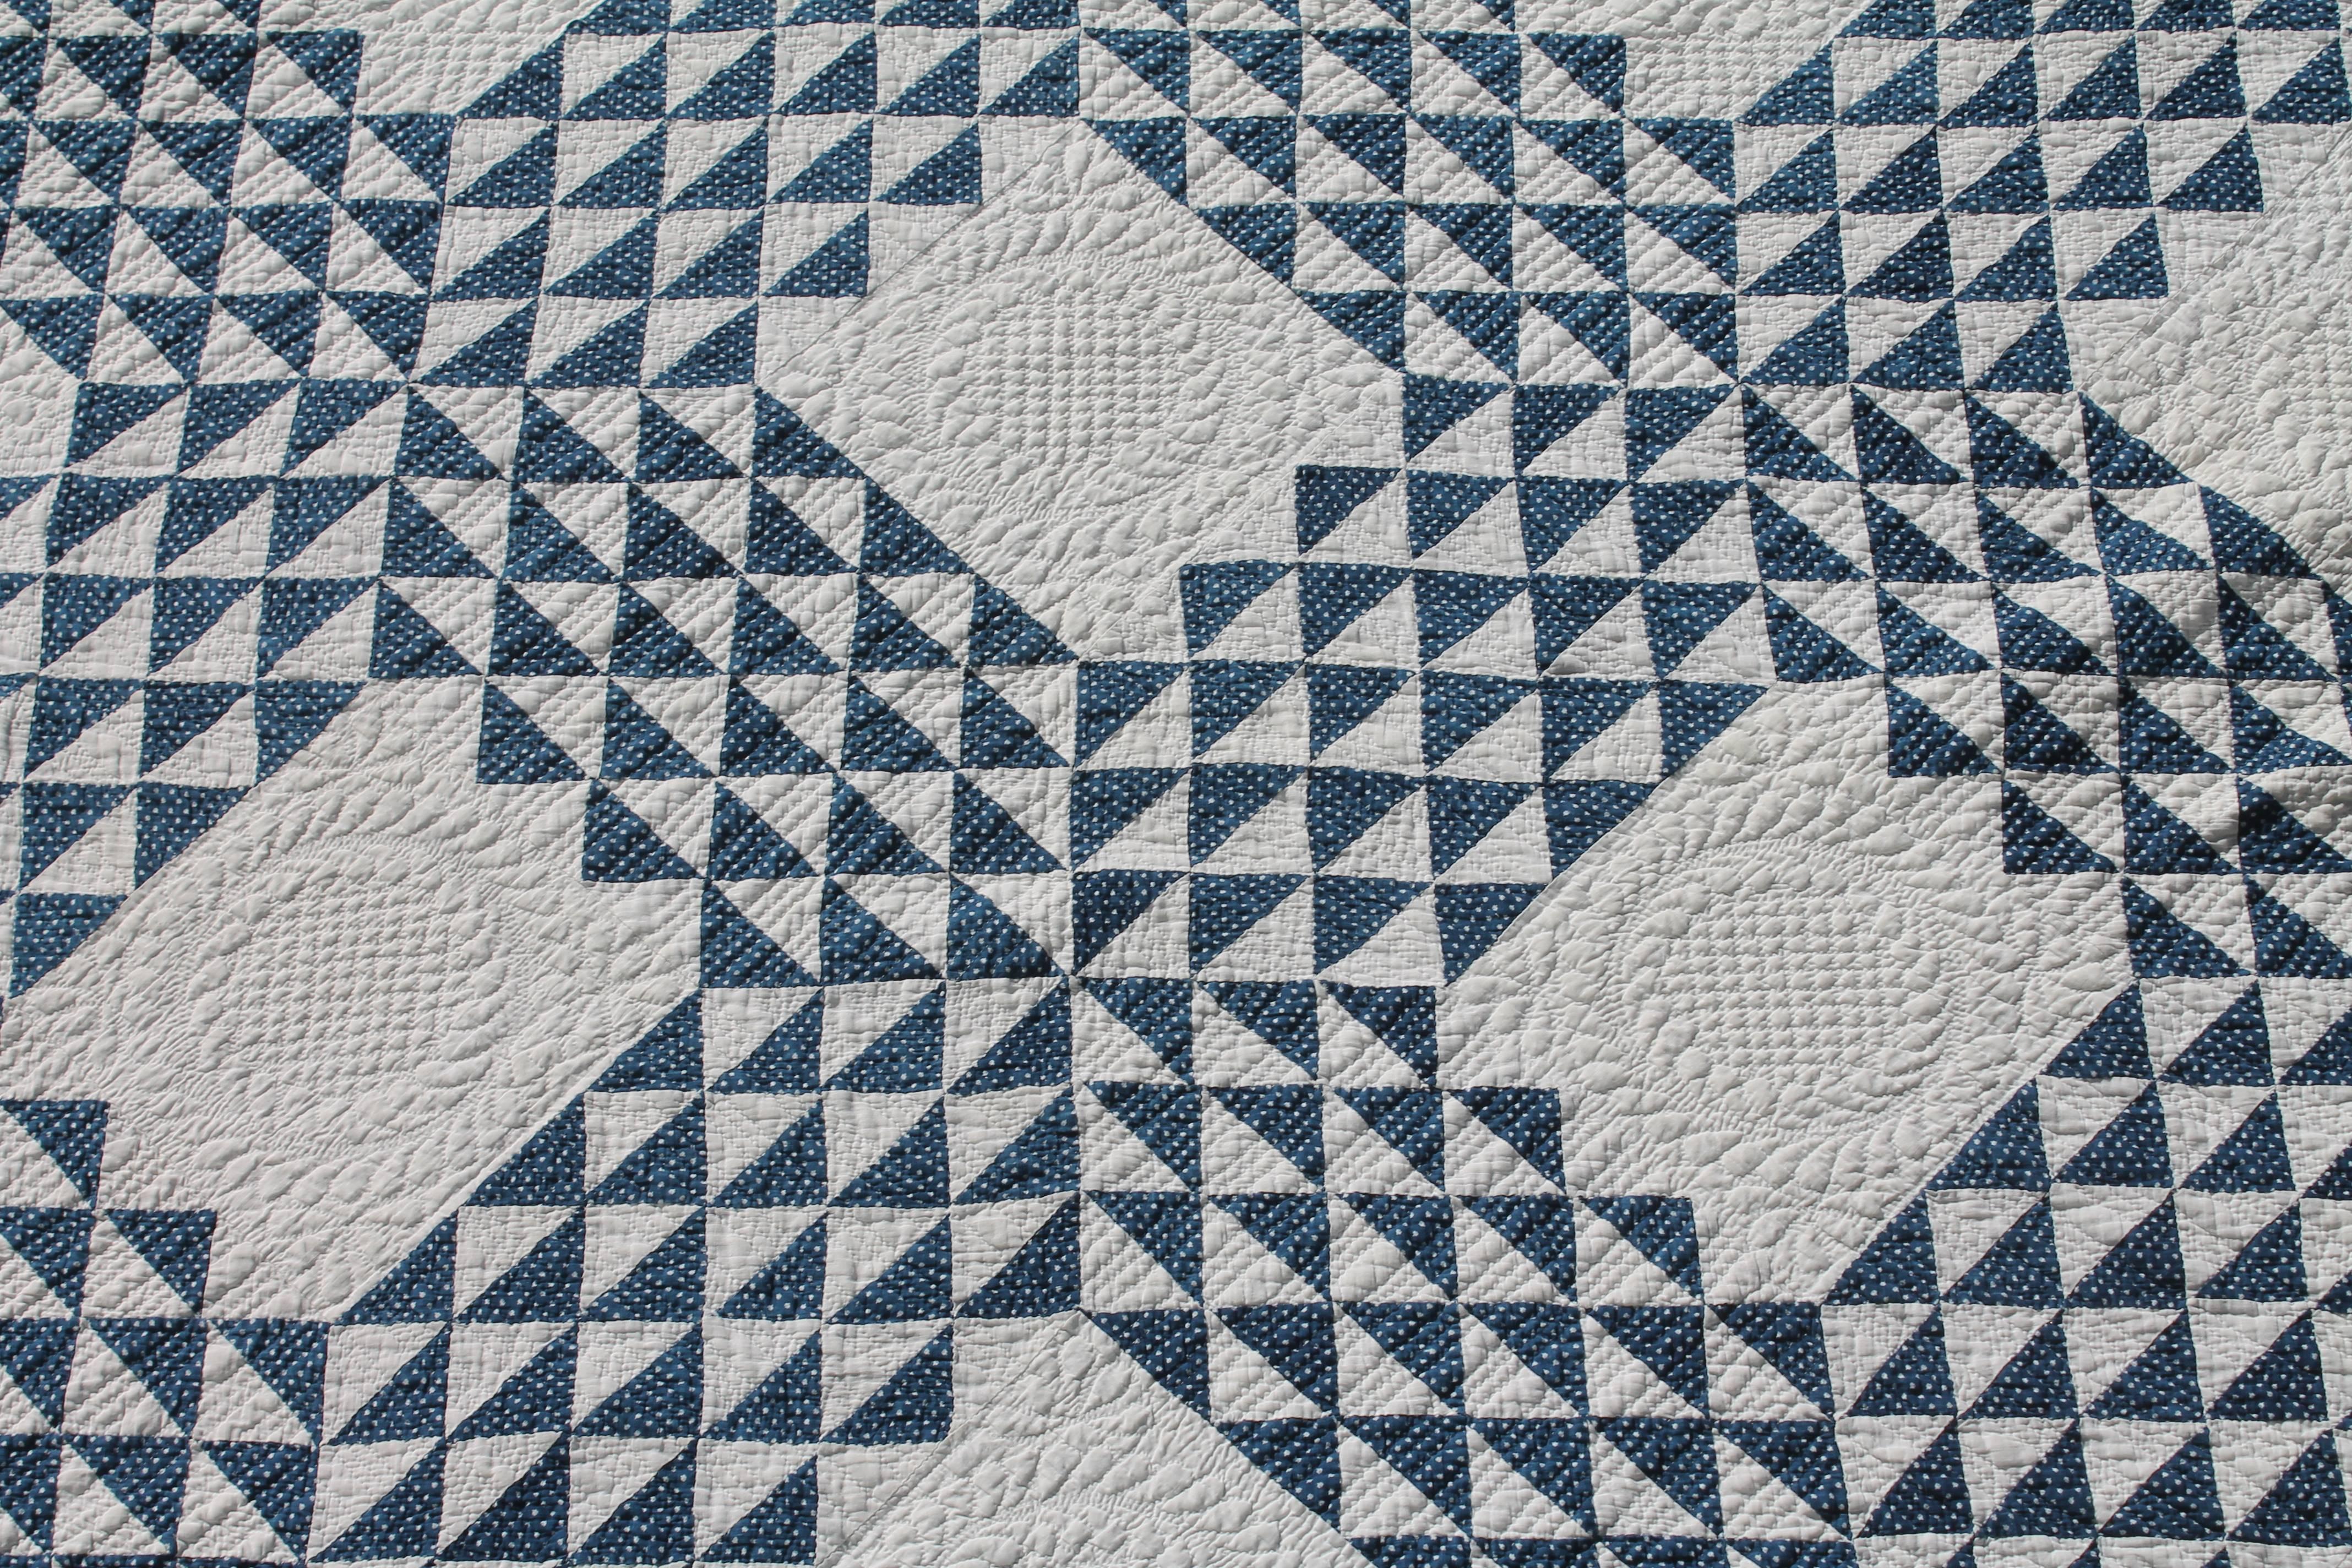 American Vintage Quilt Blue and White Ocean Waves